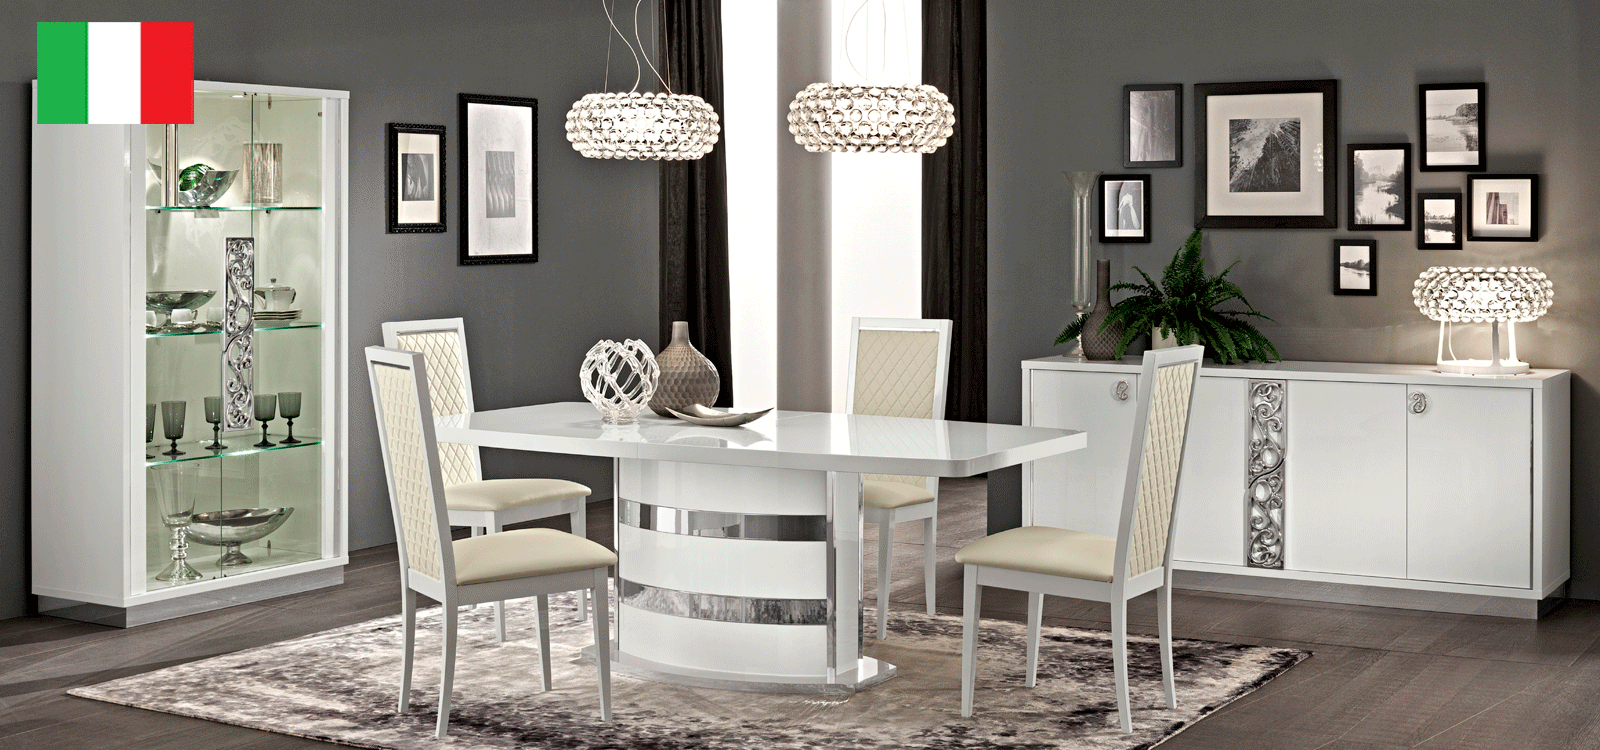 Brands Camel Gold Collection, Italy Roma Dining White, Italy